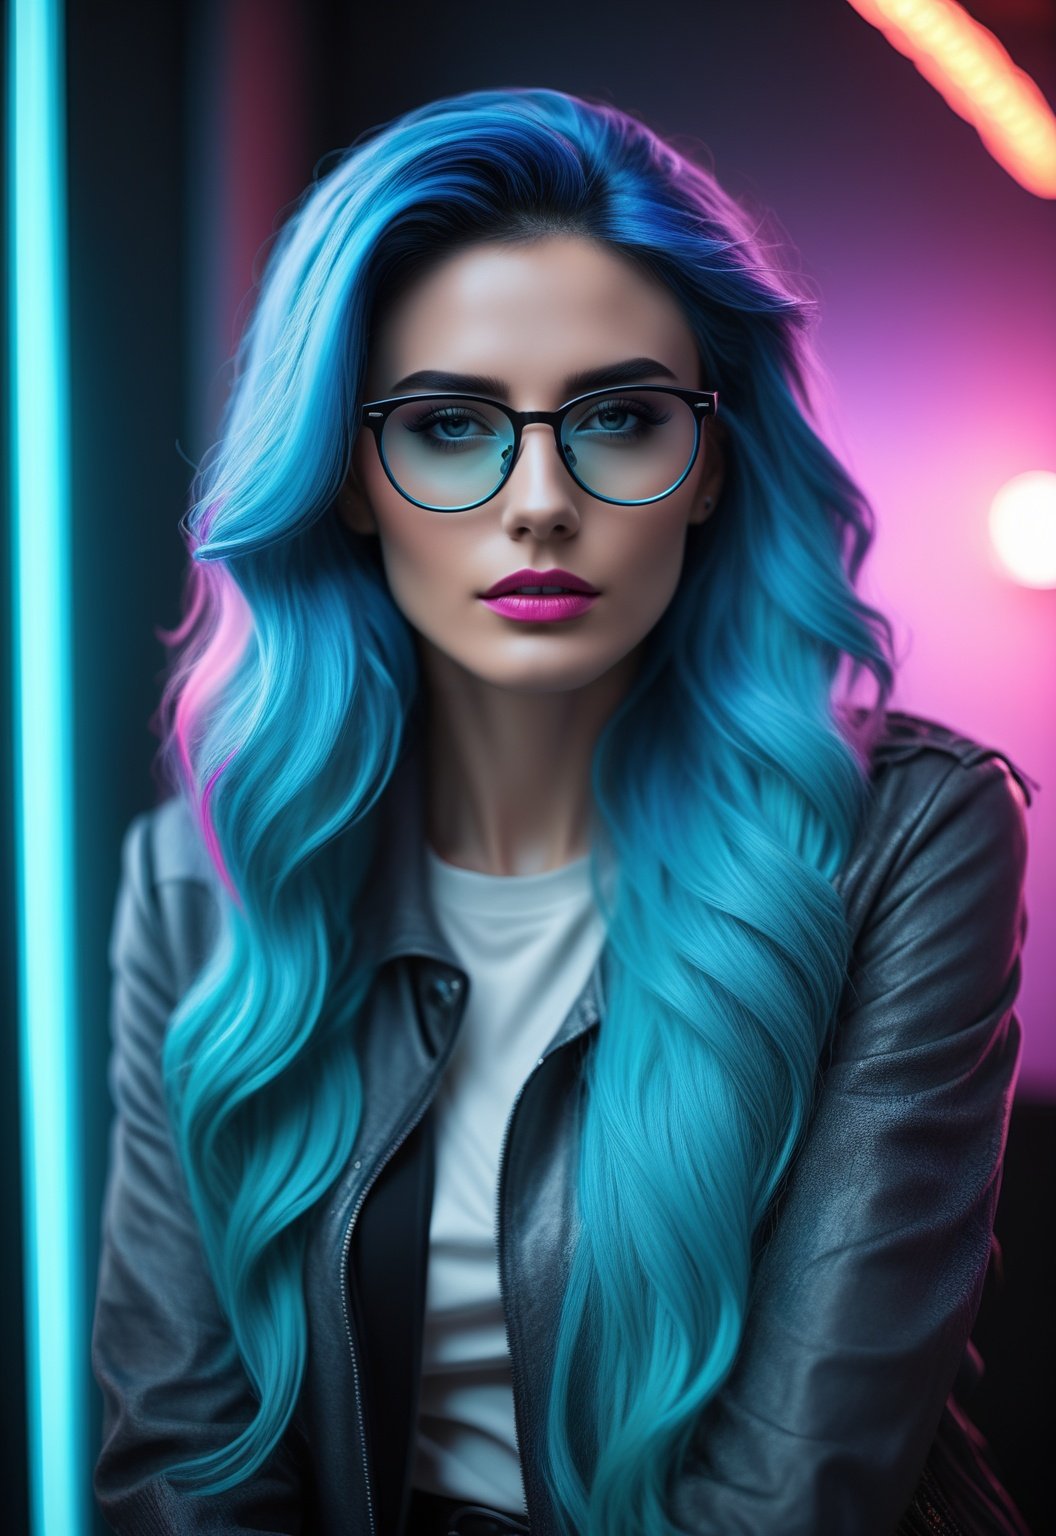 masterpiece, ((fantasy)1.5 photography, high-quality imagery),woman, blue hair, black frame glasses, rockstar, futuristic, neon, long wavy hair, cellphone, background in a room, realistic style, 8k,exposure blend, medium shot, bokeh, (hdr:1.4), high contrast, (cinematic), (muted colors, dim colors, soothing tones:1.3), low saturation, (hyperdetailed:1.2), (noir:0.4), (natural skin, skin pores, detailed skin), (intricate, vibrant, dramatic, sharp focus, dslr, Fujifilm XT3),3d toon style,neon photography style,photo r3al